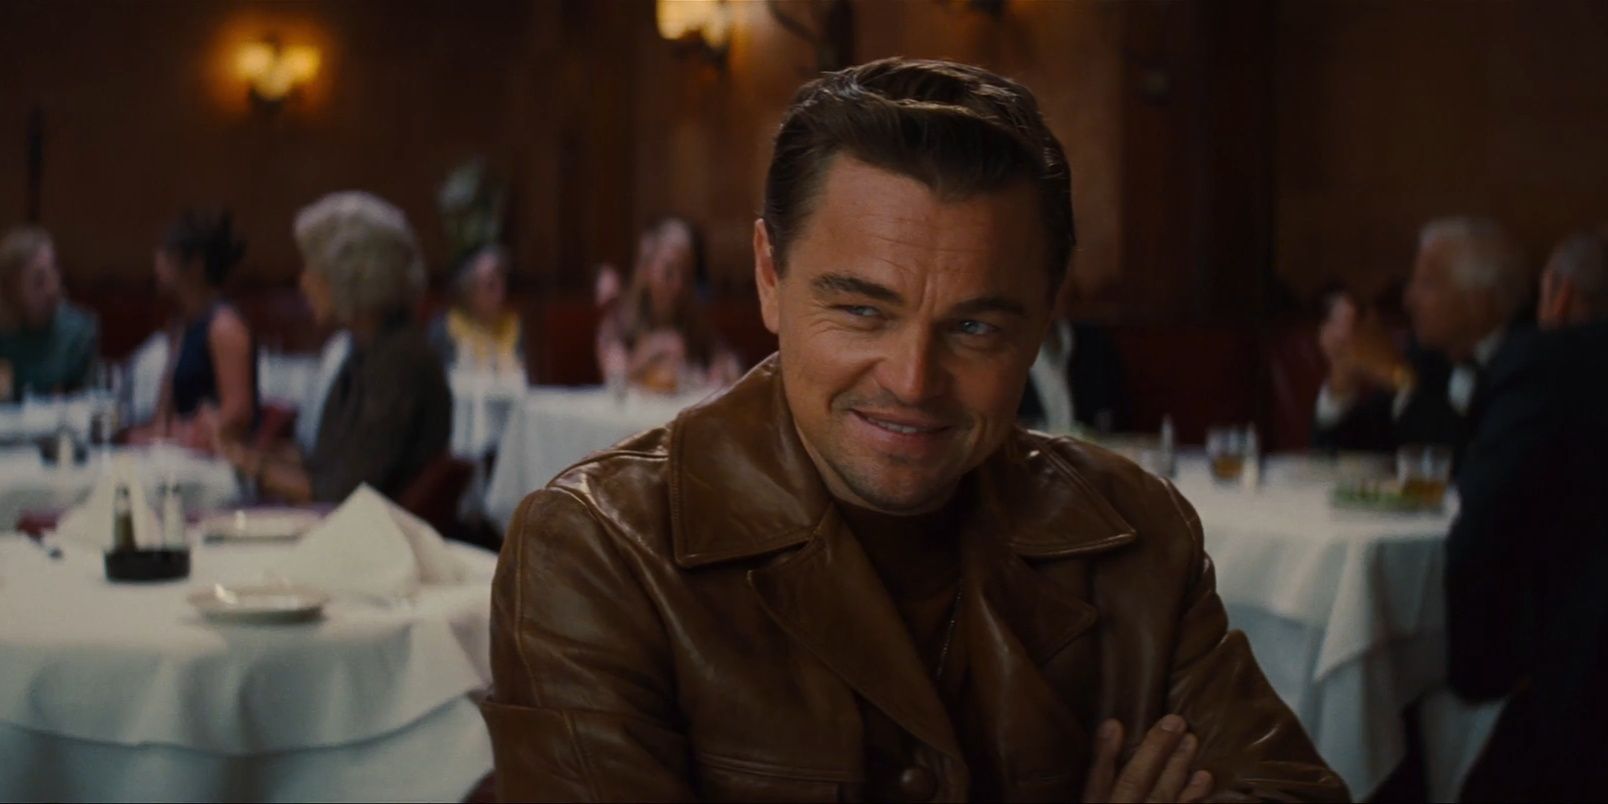 Rick Dalton smiling in a restaurant in Once Upon a Time in Hollywood 